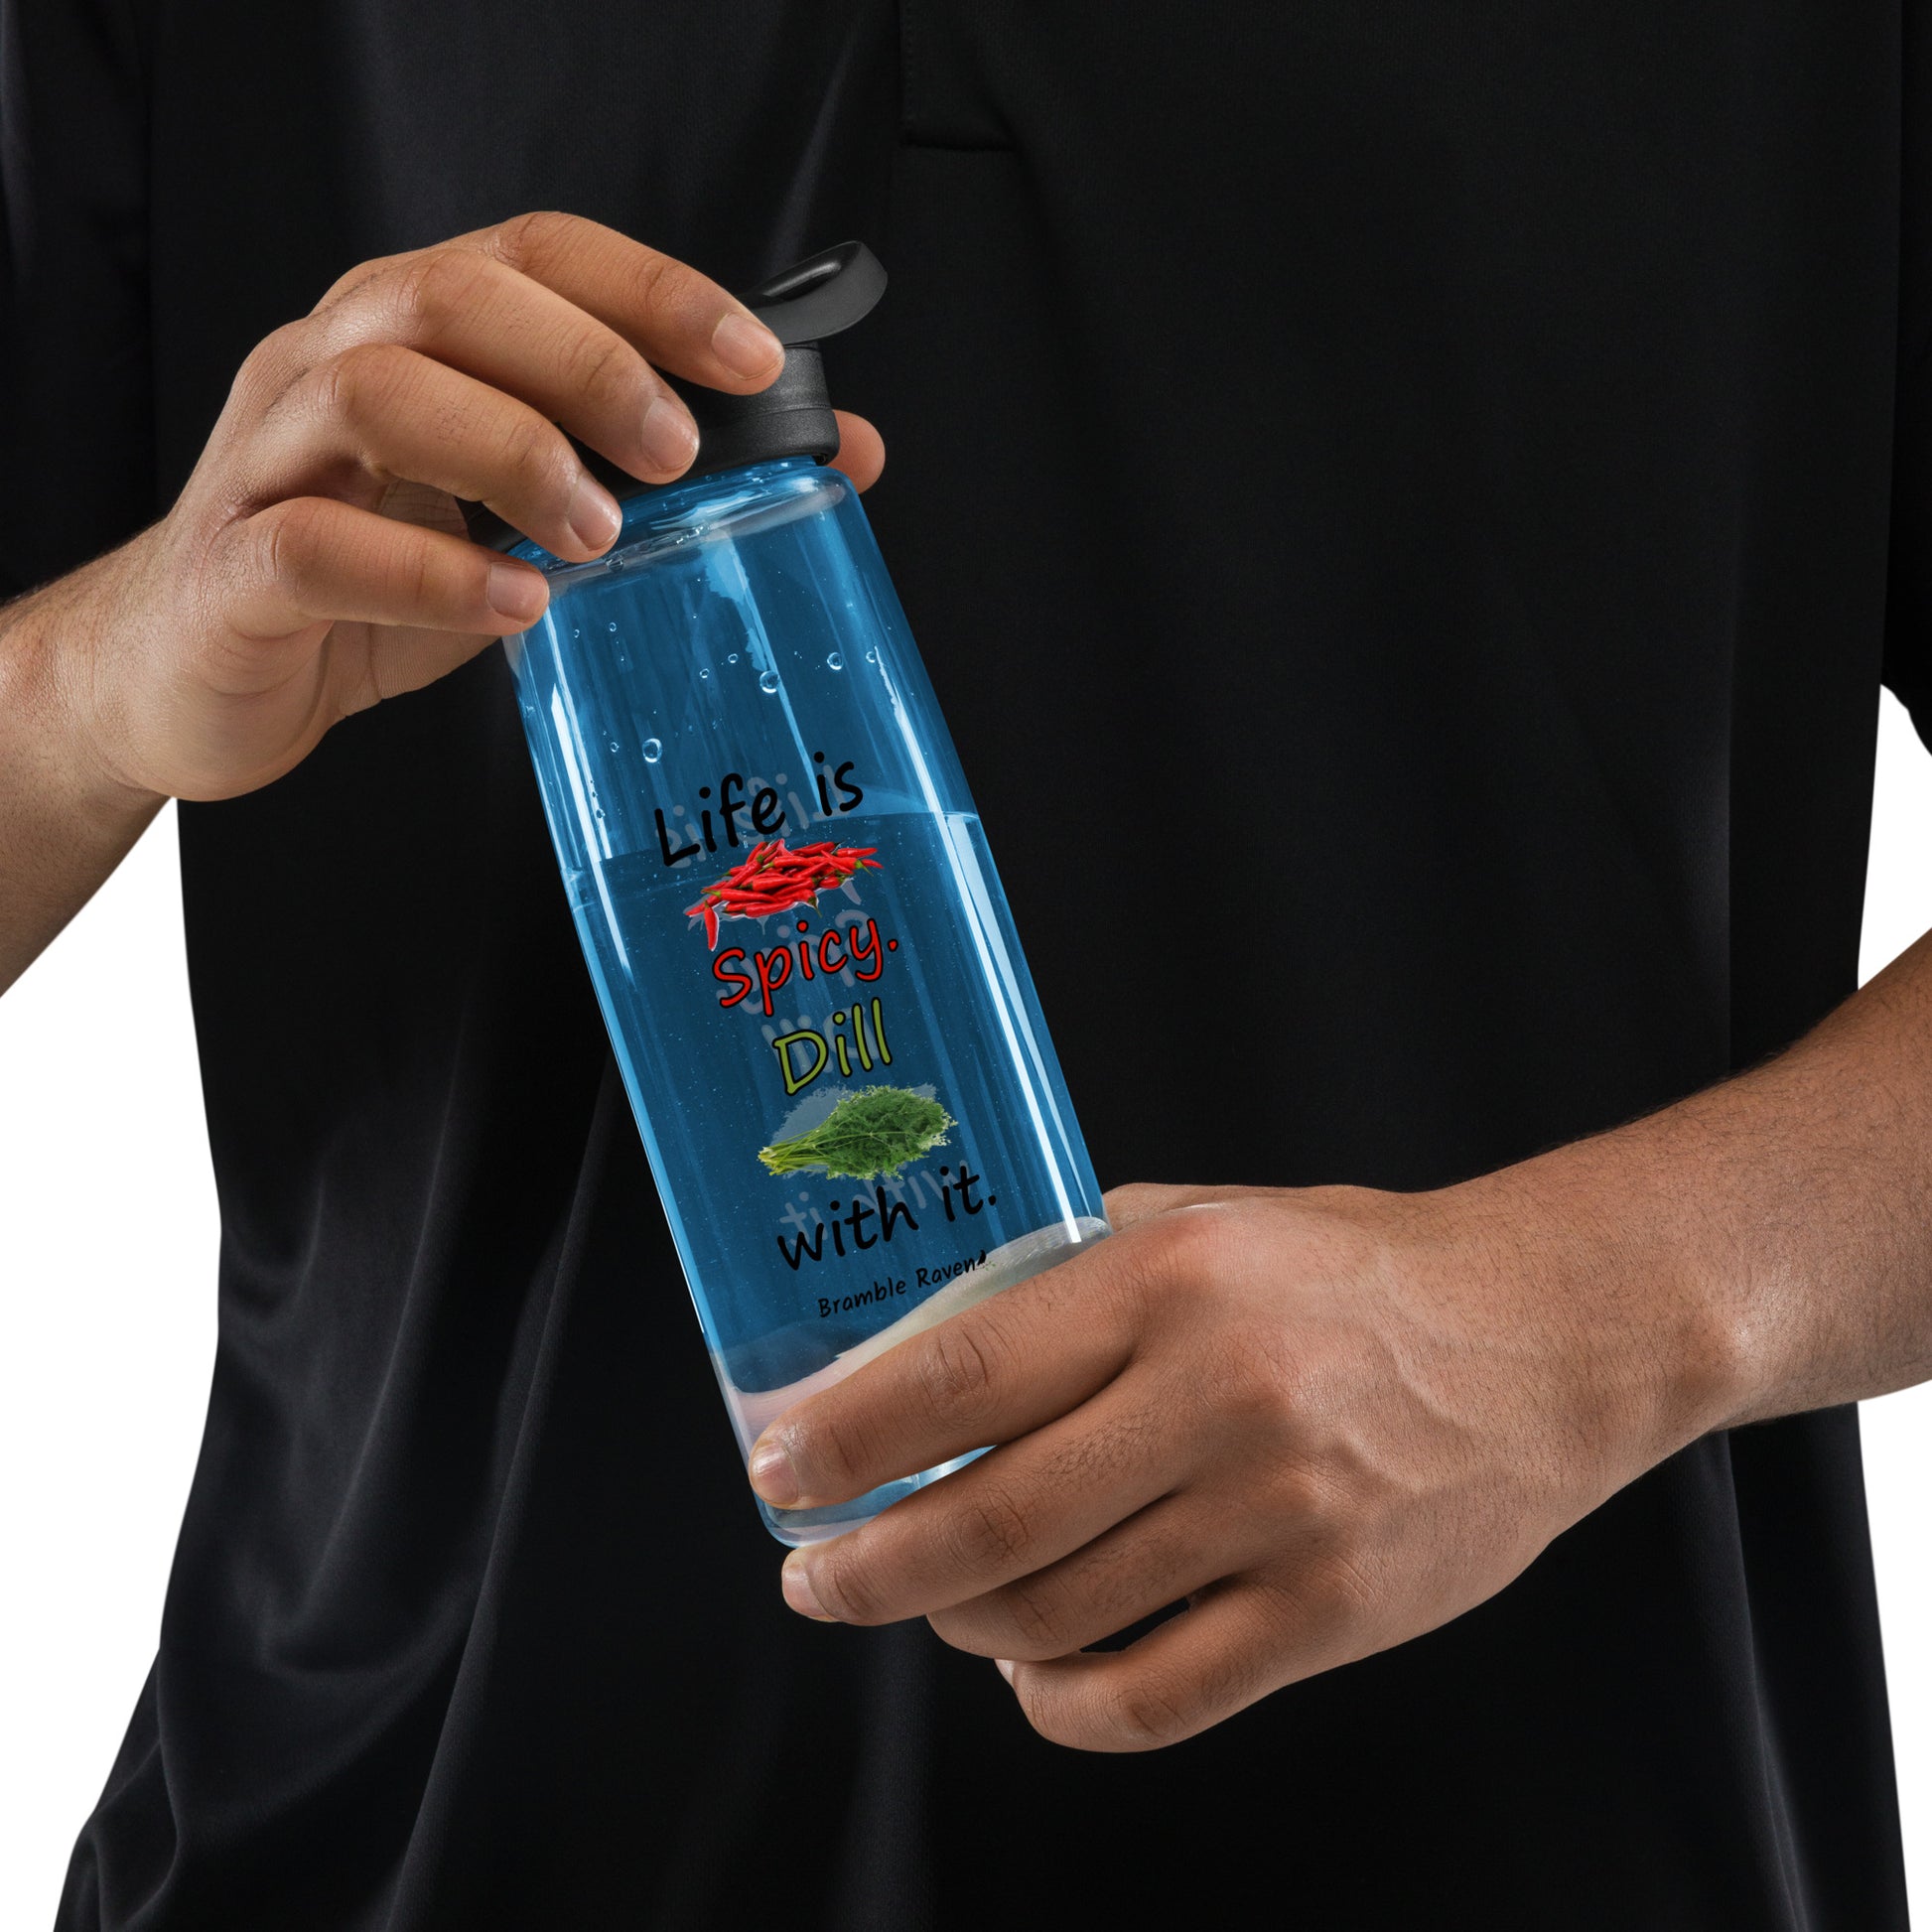 25 ounce sports water bottle with spill-proof lid and bite valve. Dark blue stain and odor-resistant BPA-free plastic. Features double-sided design of "Life is spicy. Dill with it" phrase with peppers and dill weed images. Shown in model's hands.